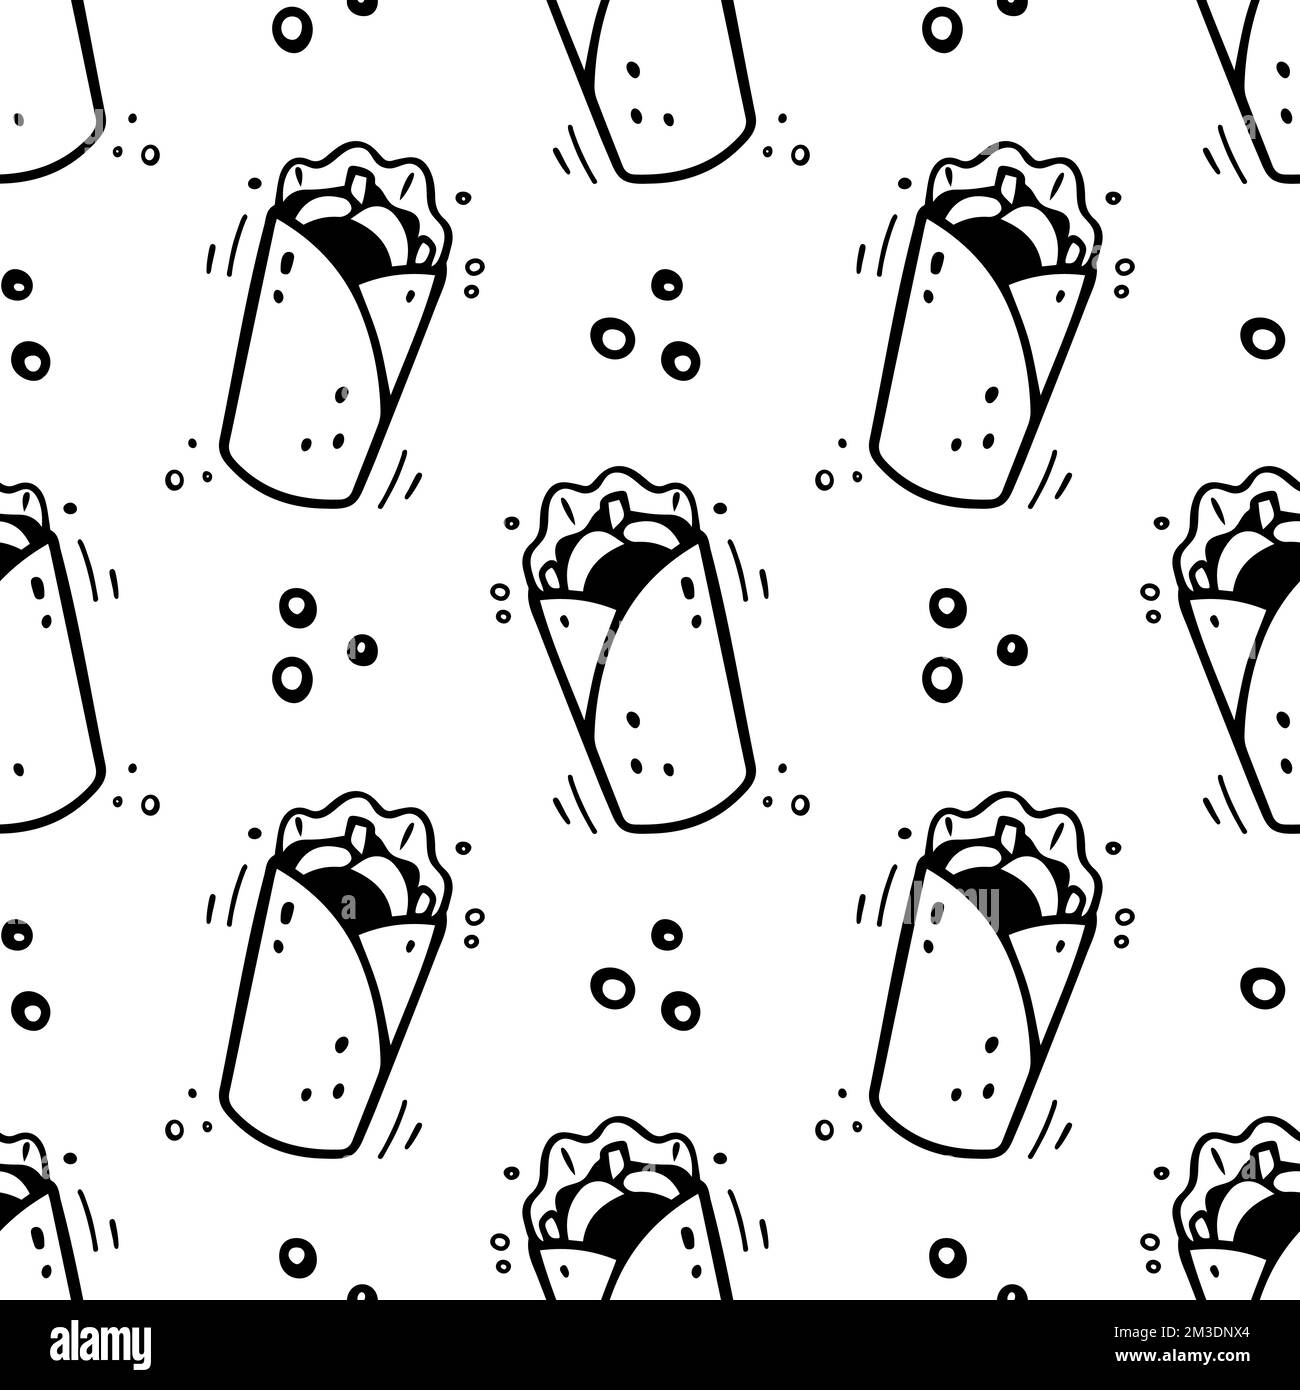 Hand drawn fast food shawarma, burrito, twister seamless pattern. Comic doodle sketch style. Vector Fast food illustration. Sketch of doner, burrito. Stock Vector